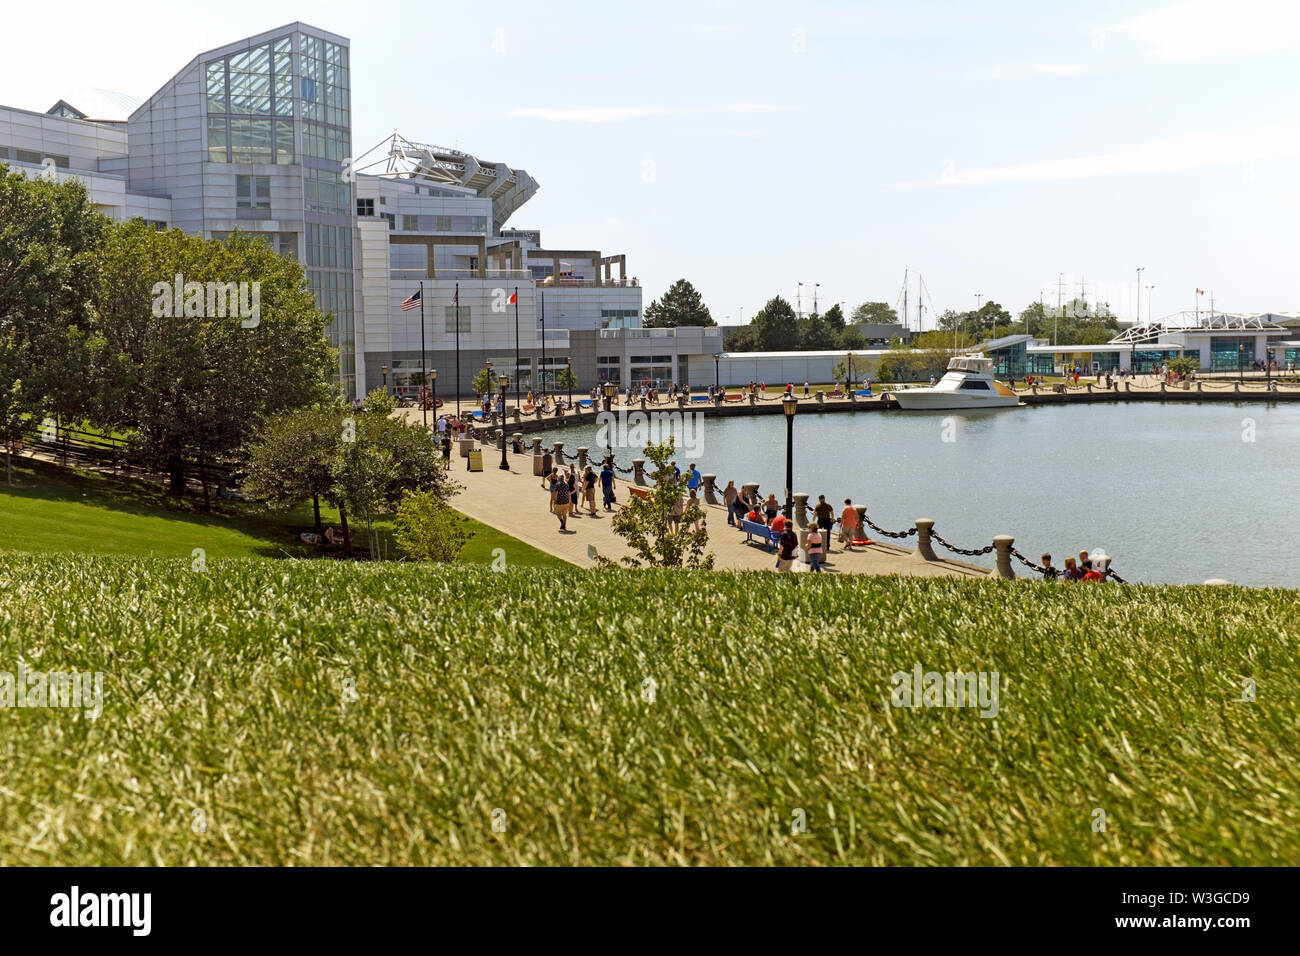 The Cleveland waterfront in the Northcoast Harbor has a popular promenade connecting major attractions, greenspace, and the lakefront. Stock Photo